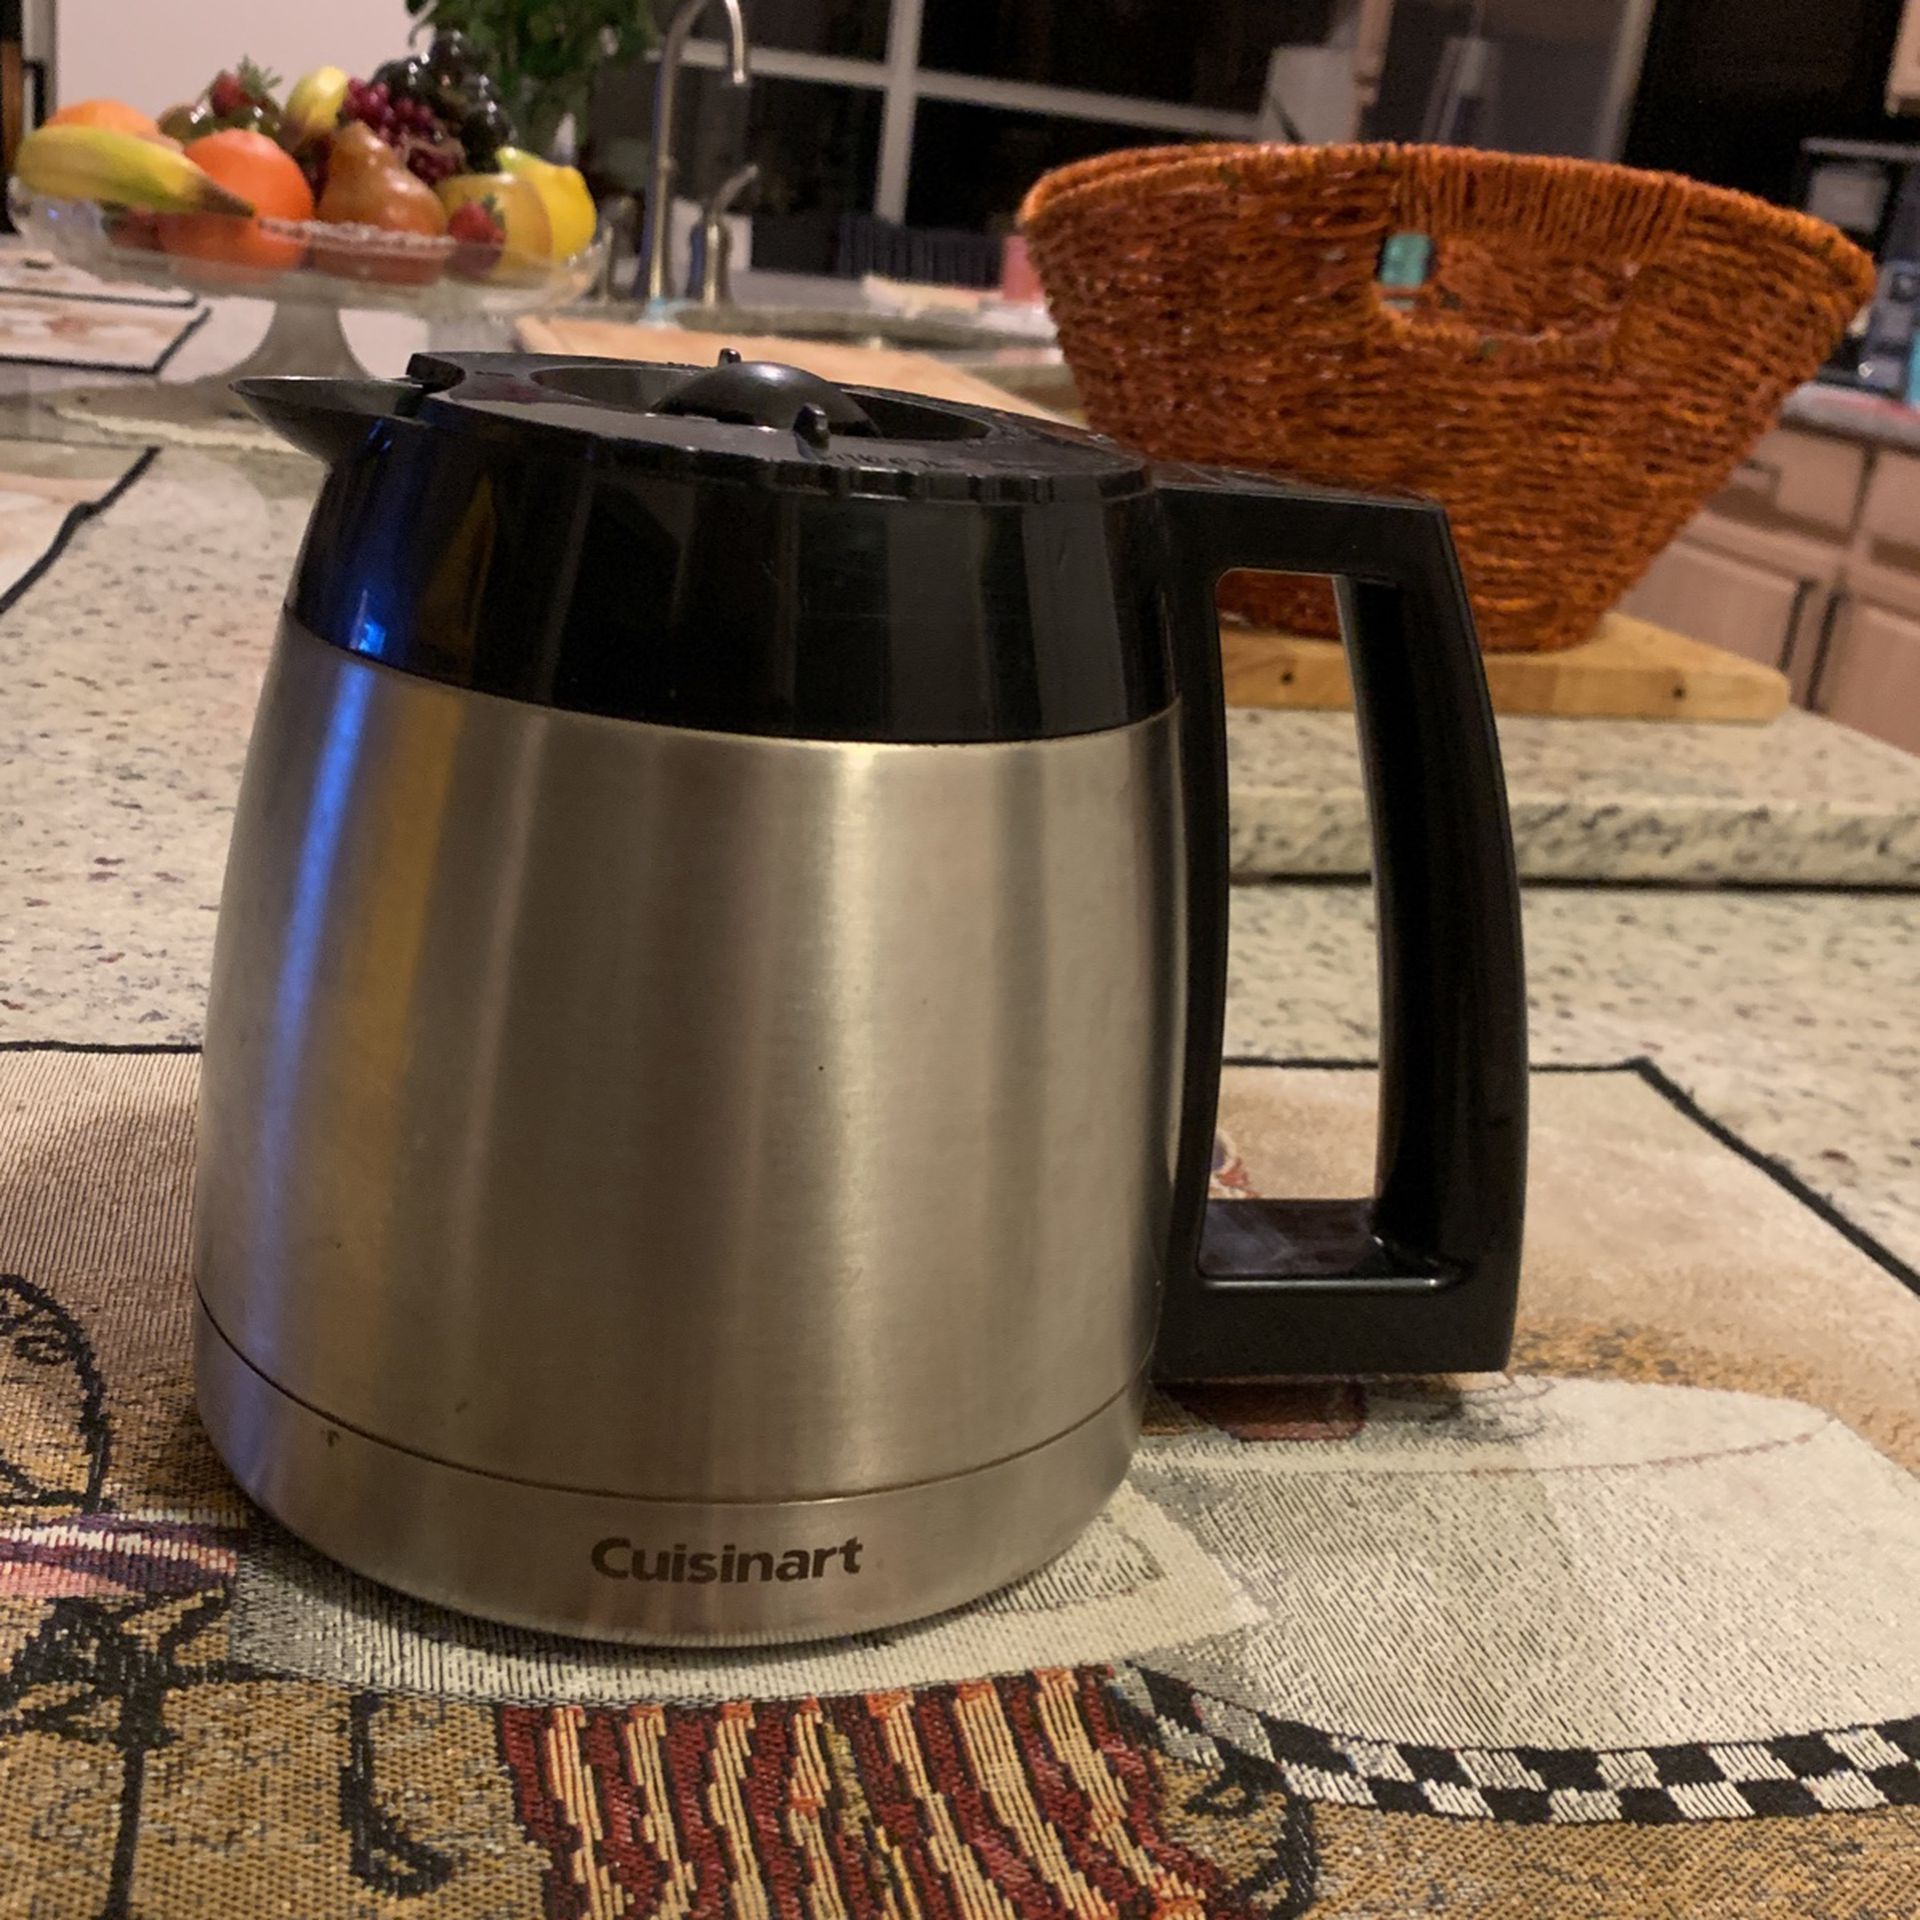 Cuisinart 12-Cup Stainless Thermal Carafe by Cuisinart .Cuisinart - L12-Cup Stainless Thermal Carafe . Very good Strong Durable Thermal